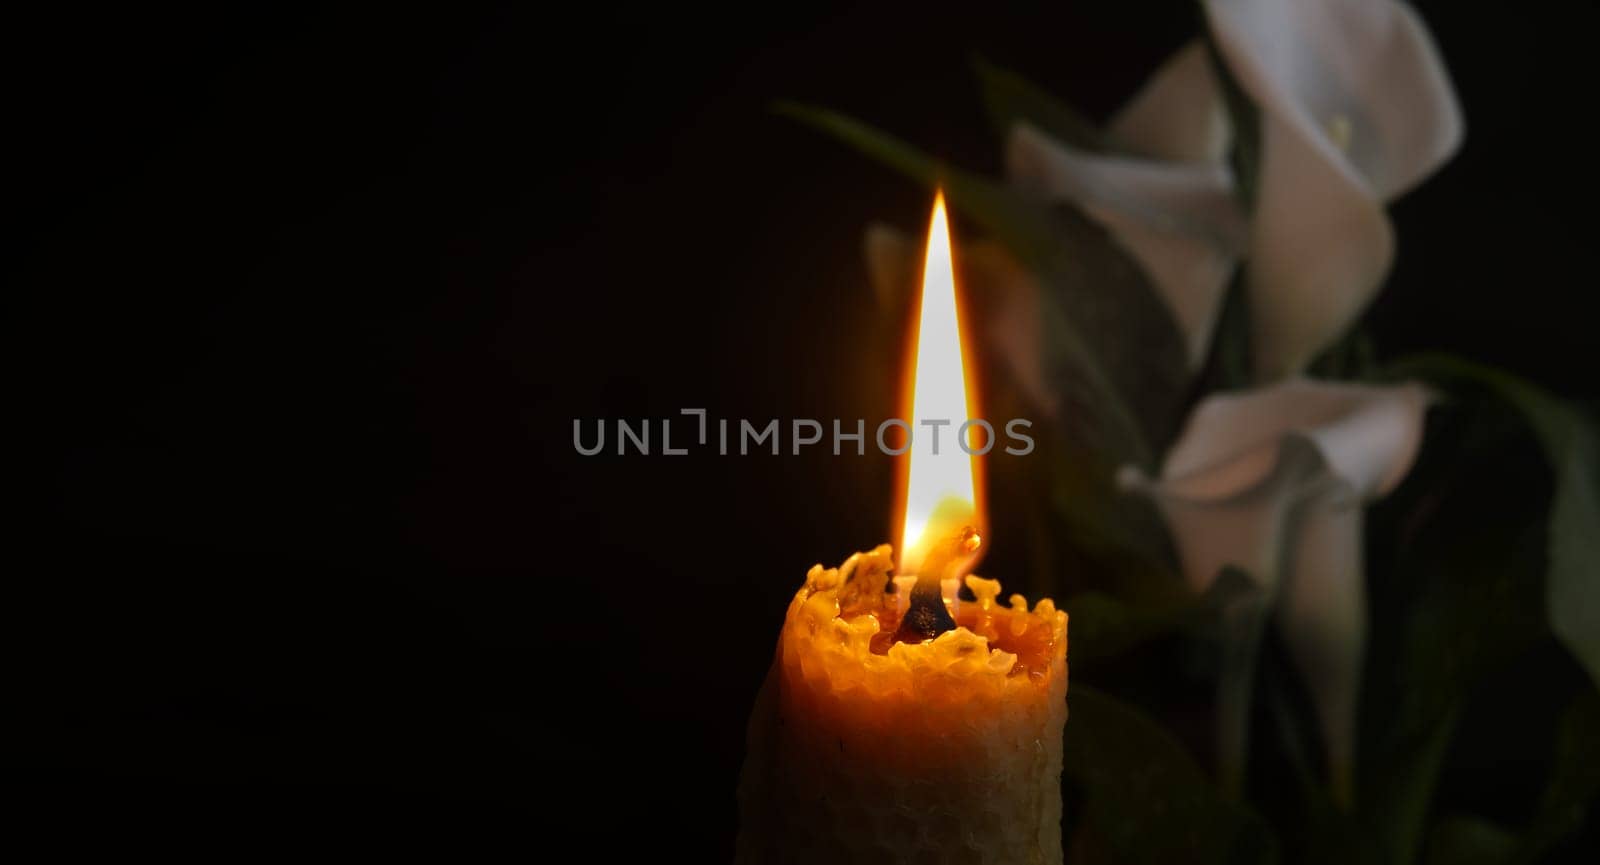 White calla lily flowers and burning wax candle in darkness by NetPix